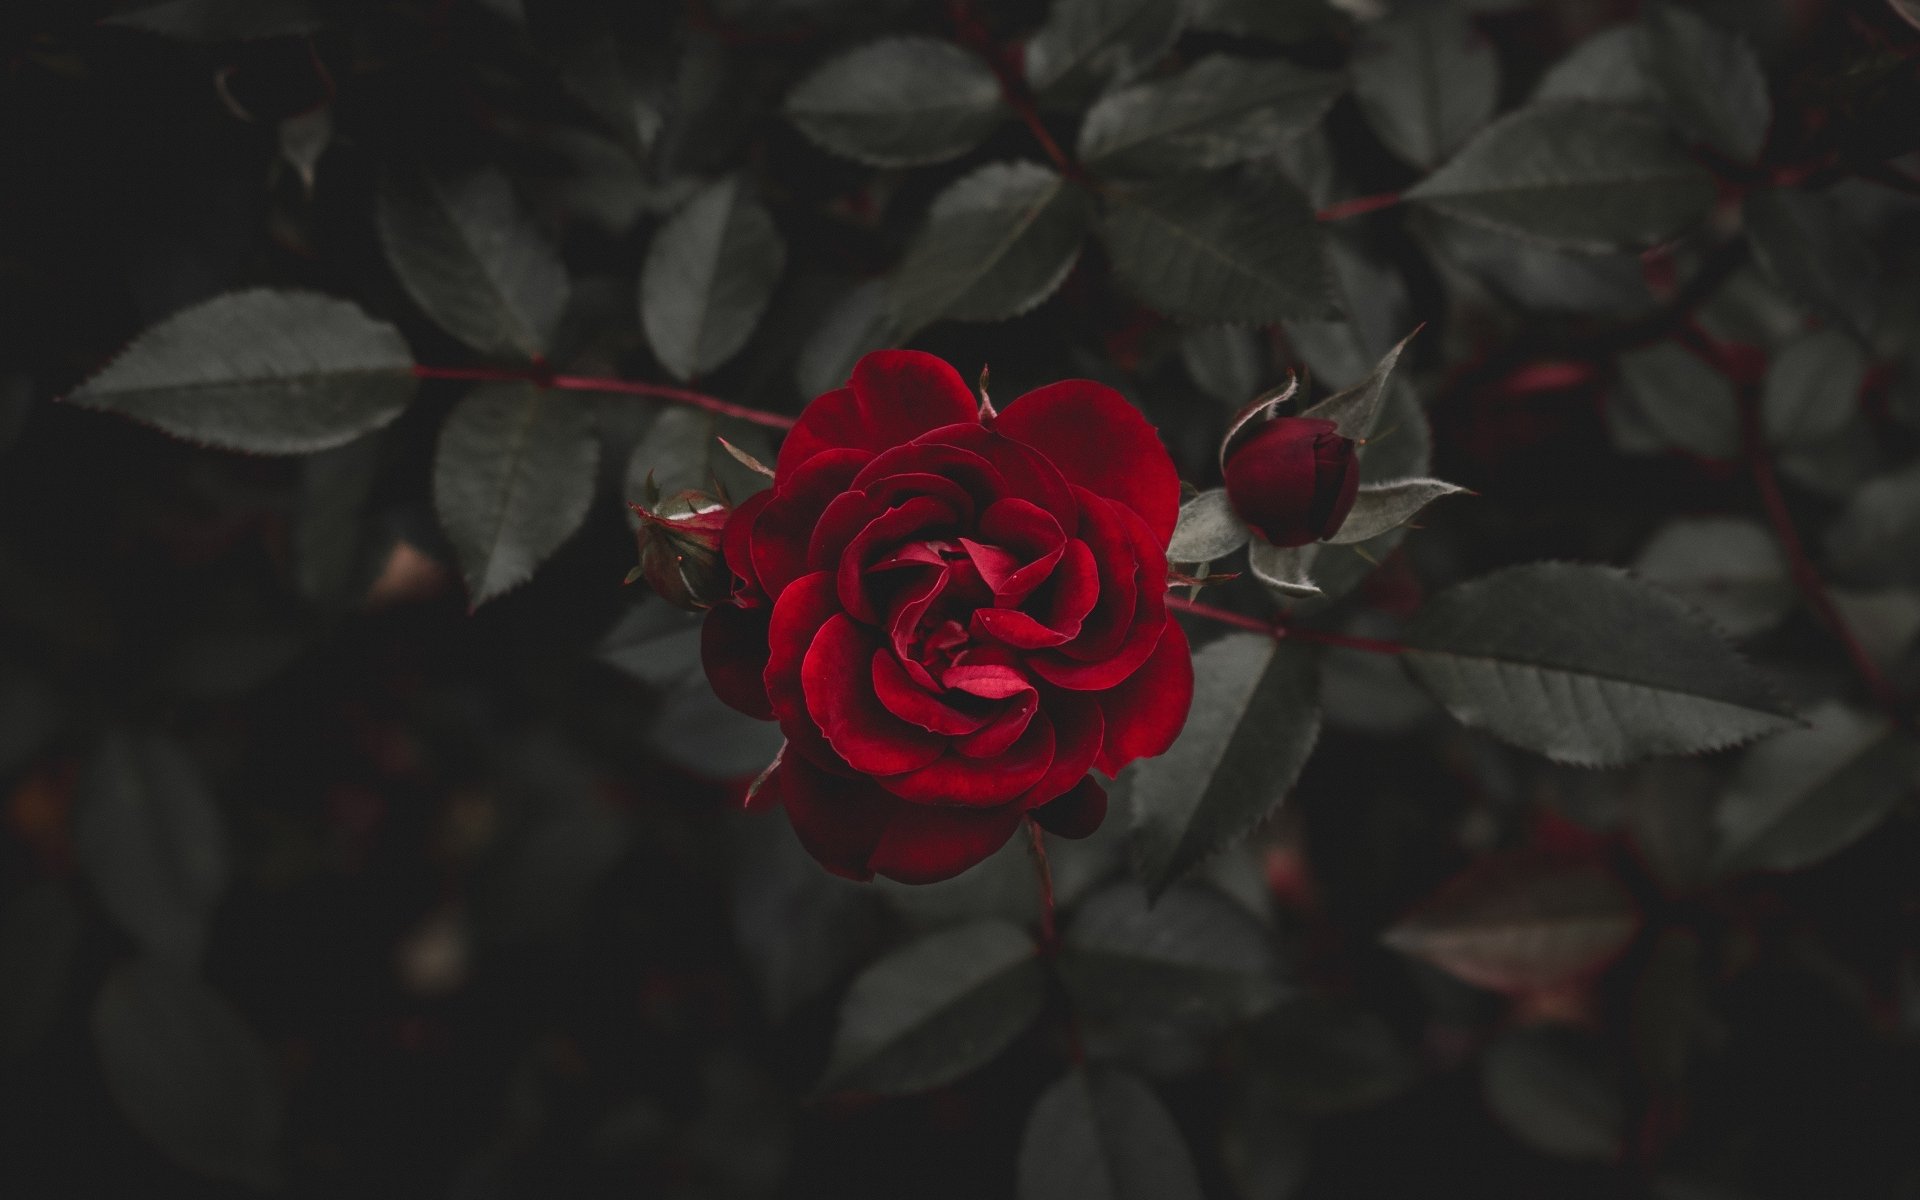 Red Roses Are Beauty 4k Ultra Hd Wallpaper Background Image